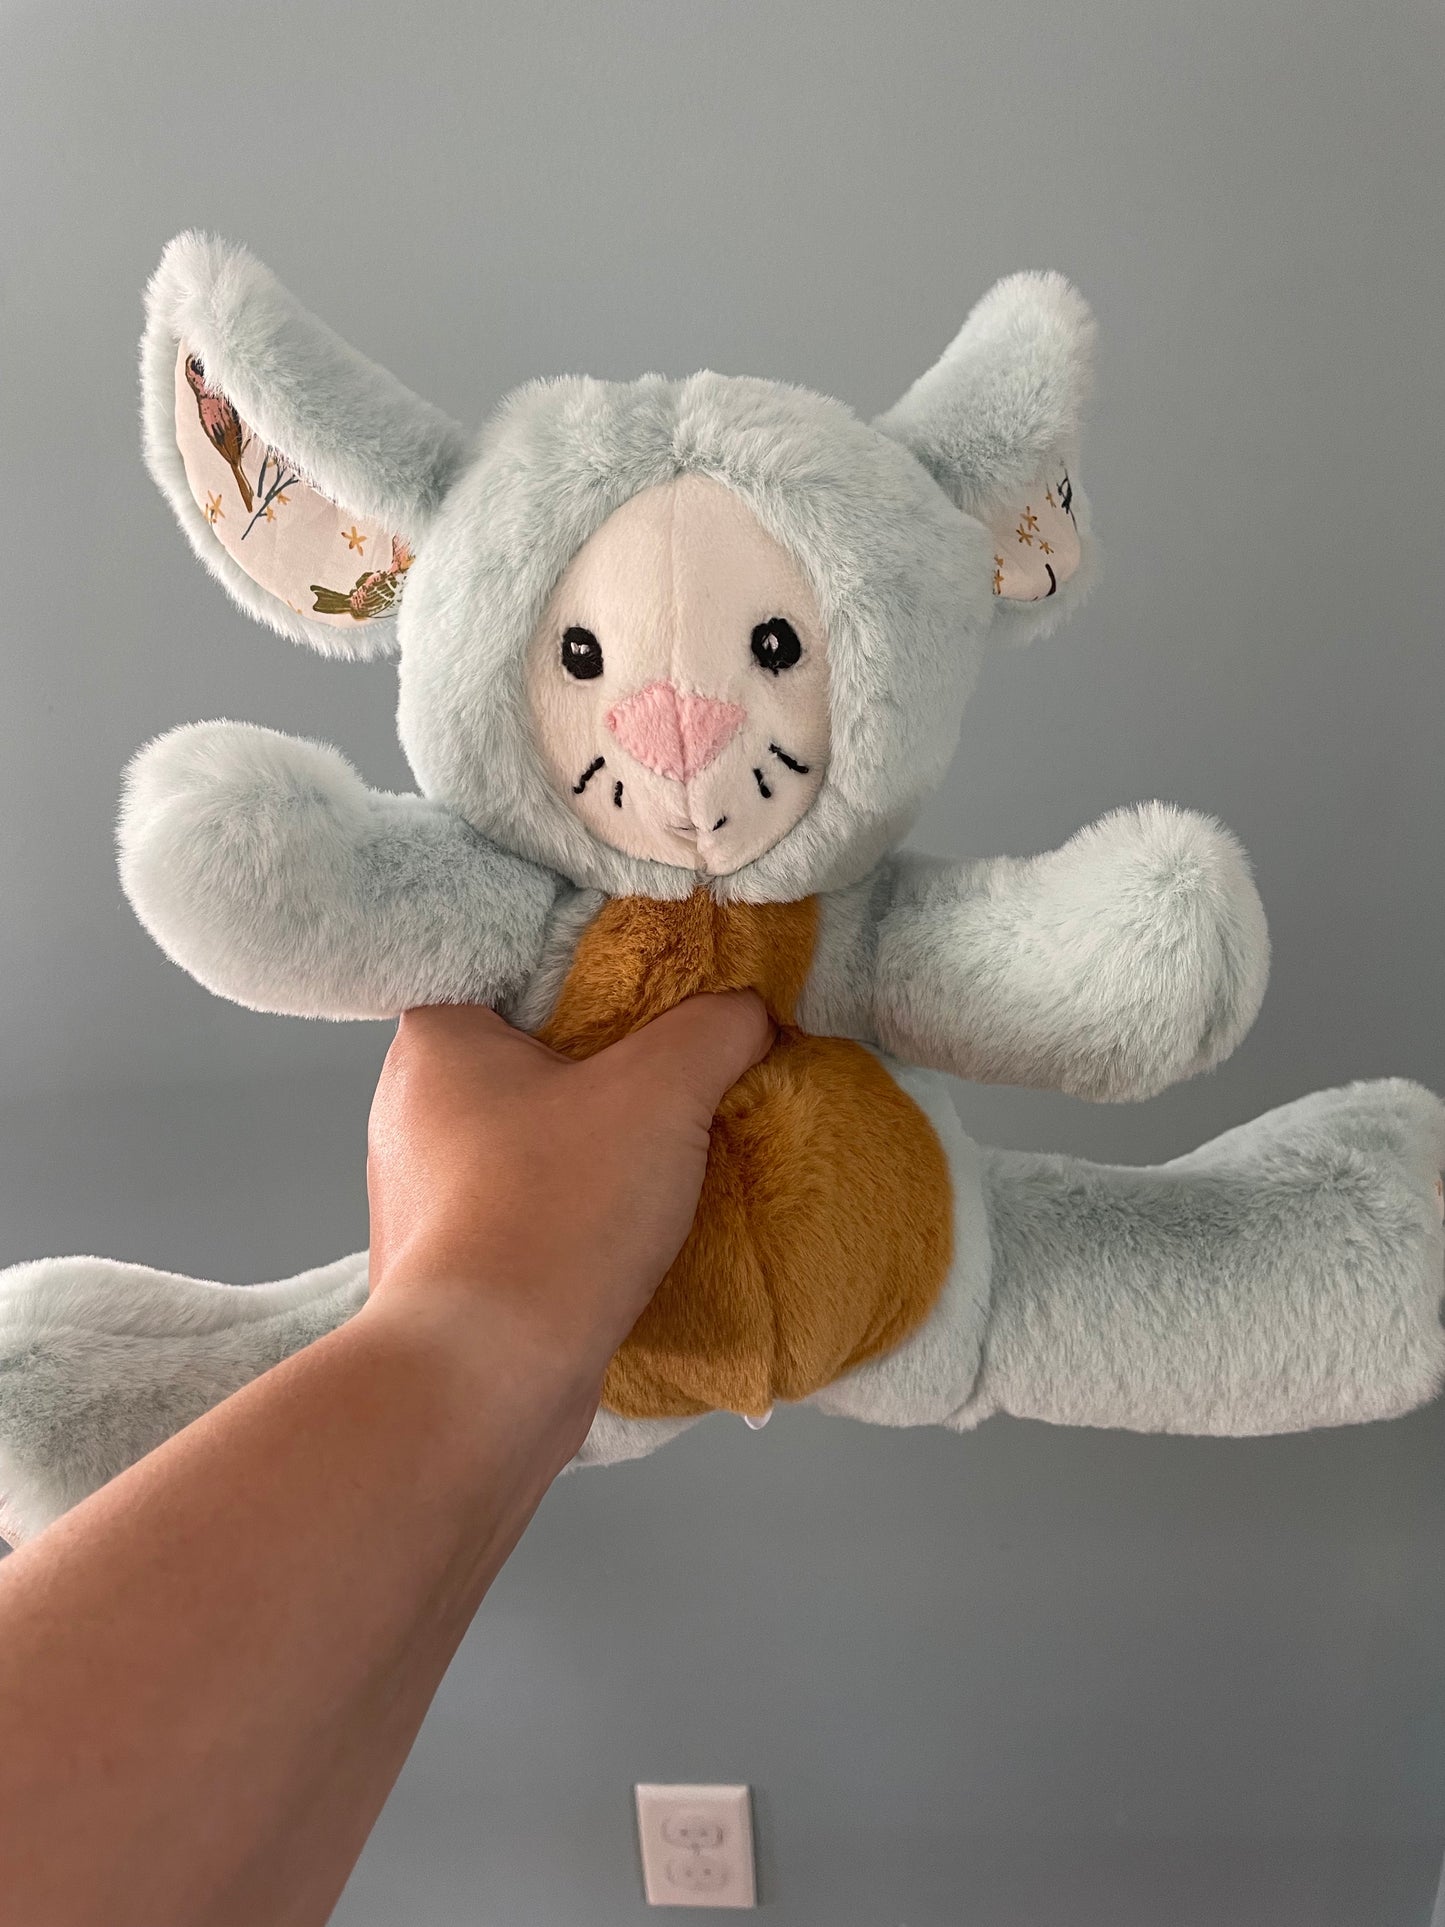 Blue and Gold Mouse Stuffed Animal Plush